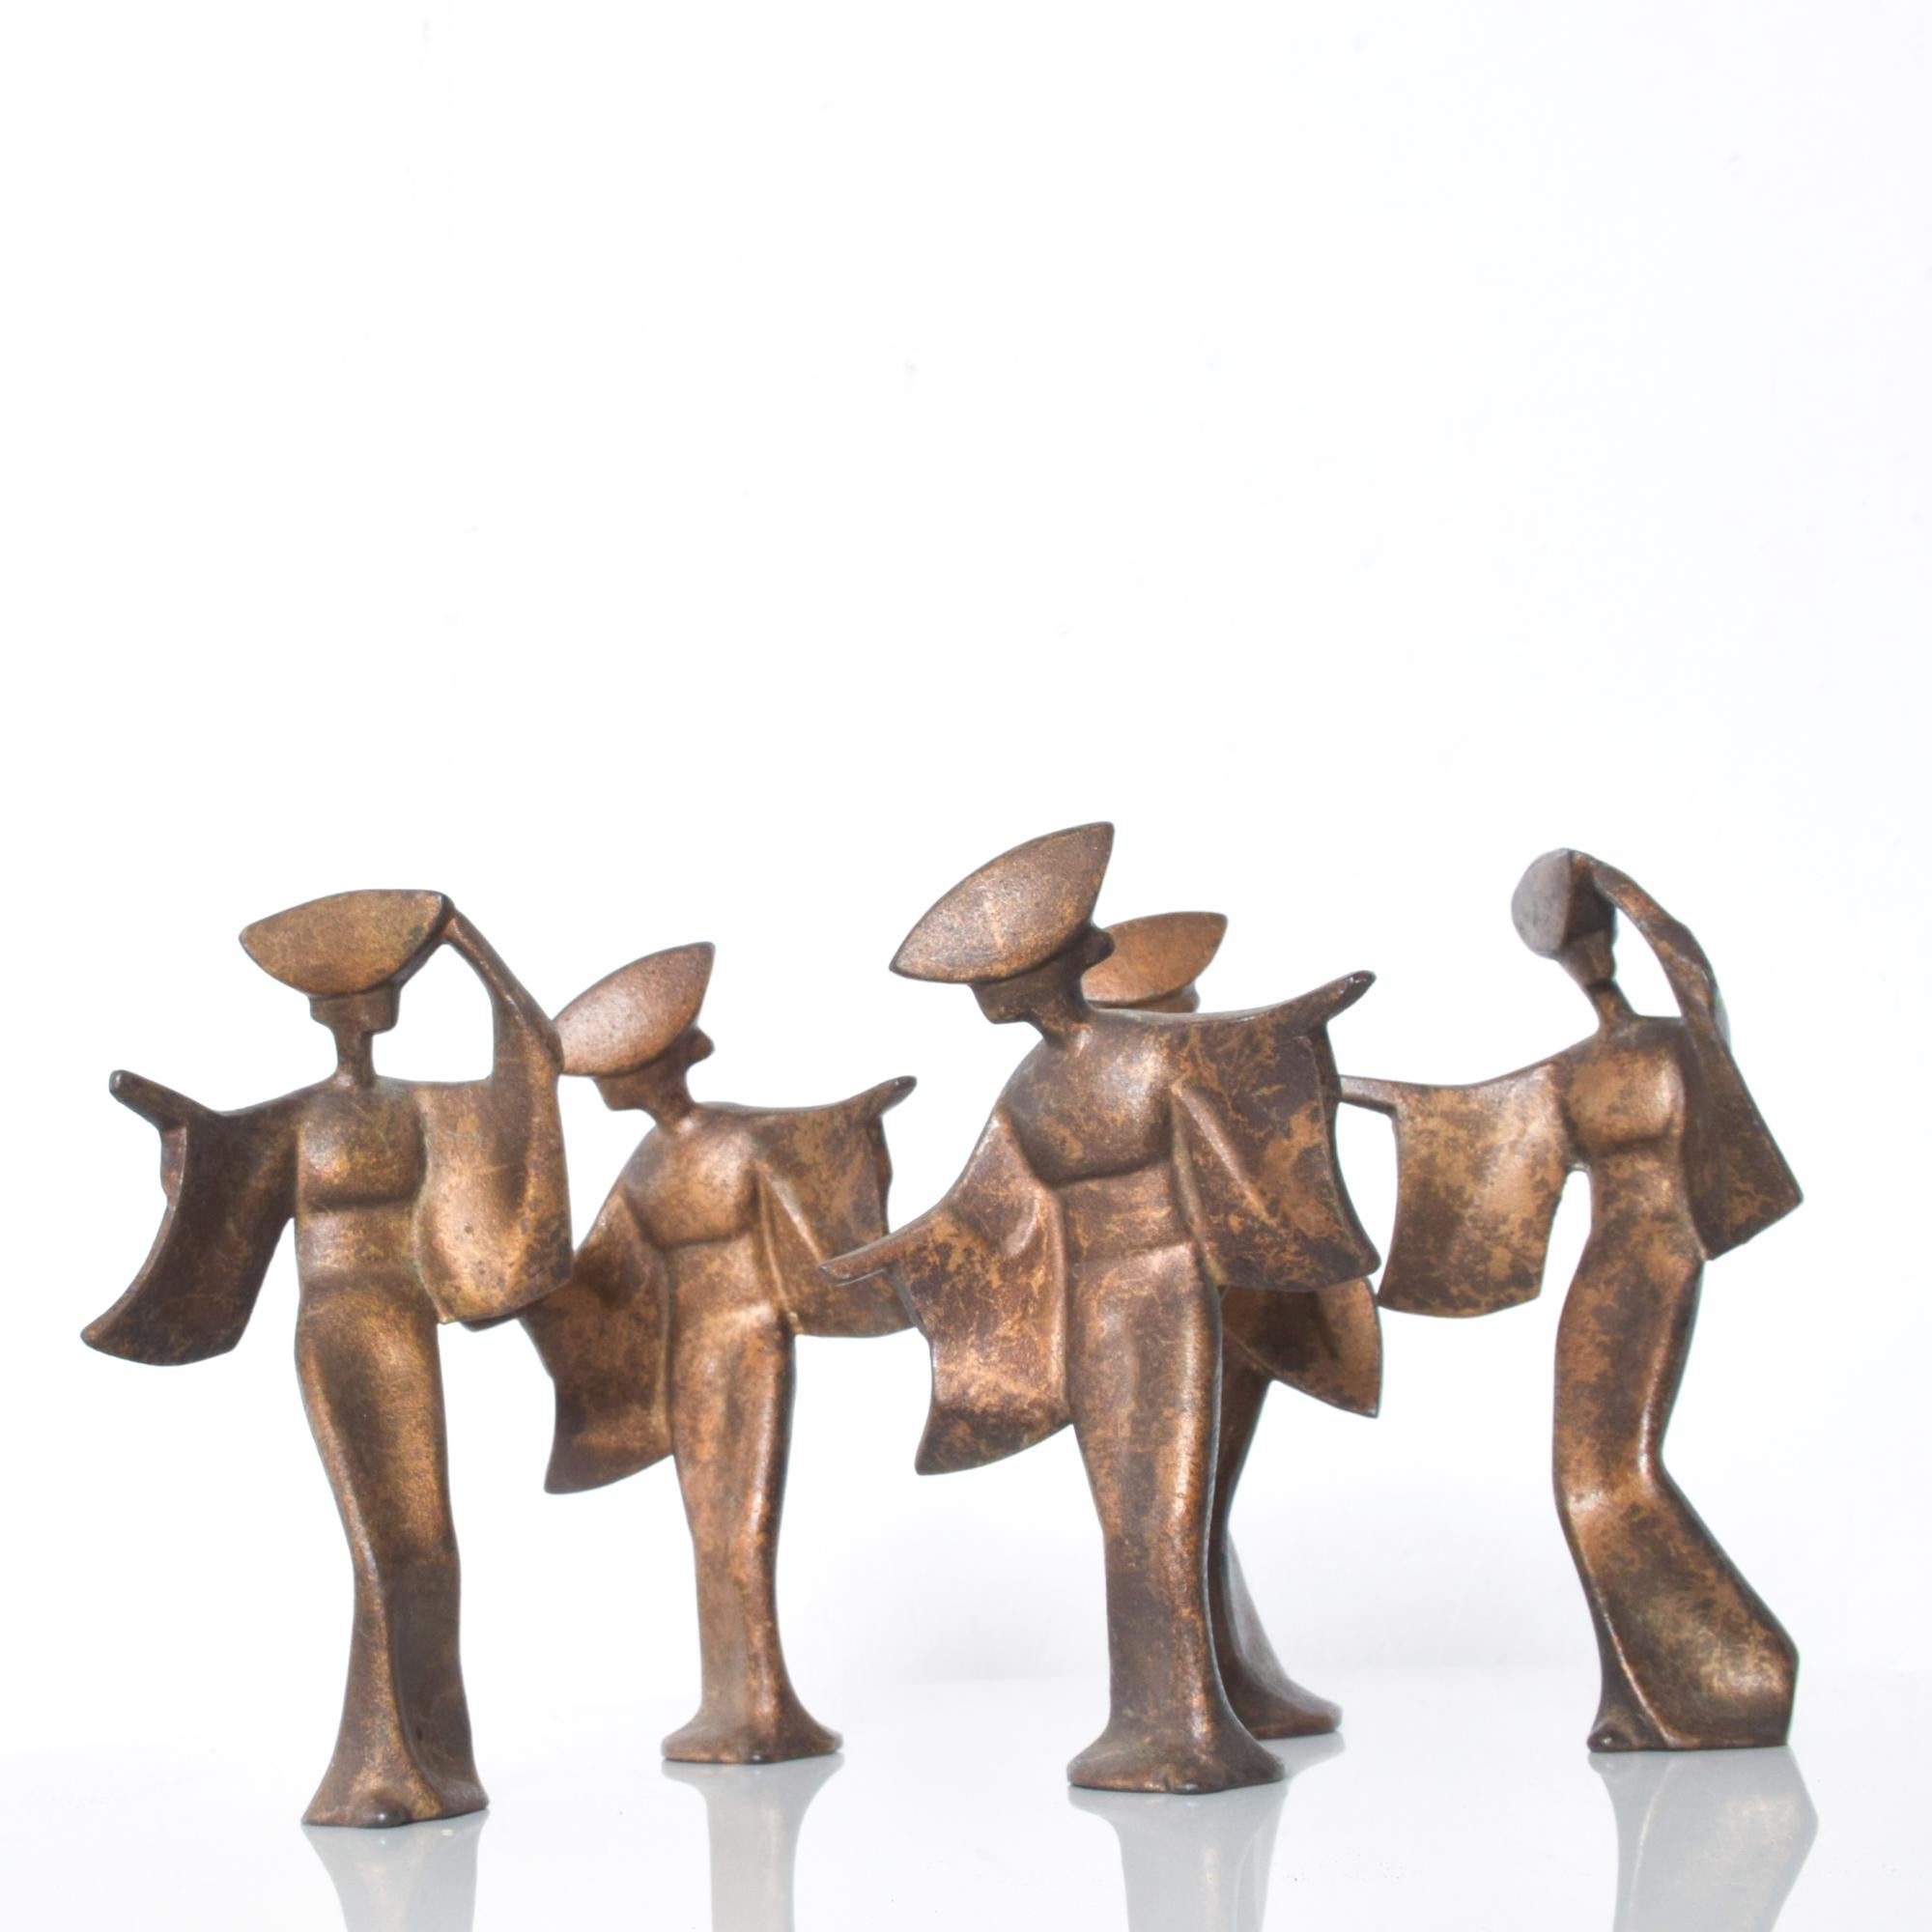 Set of four lovely Japanese Art Deco graceful geisha figurine sculptures in patinated bronzed finished iron
Made in Japan
Measures: 7